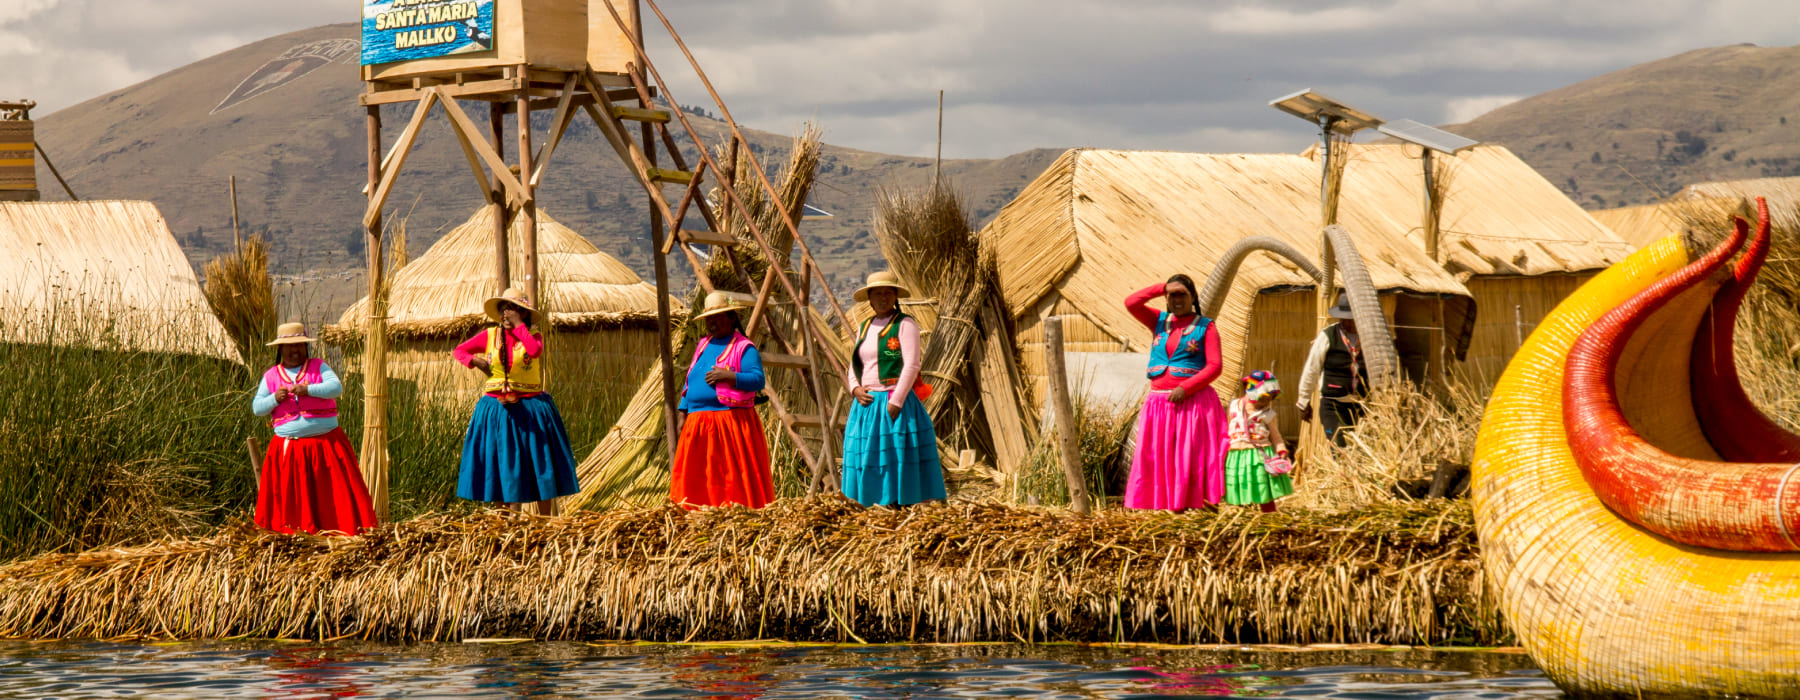 THE FLOATING ISLANDS OF THE UROS